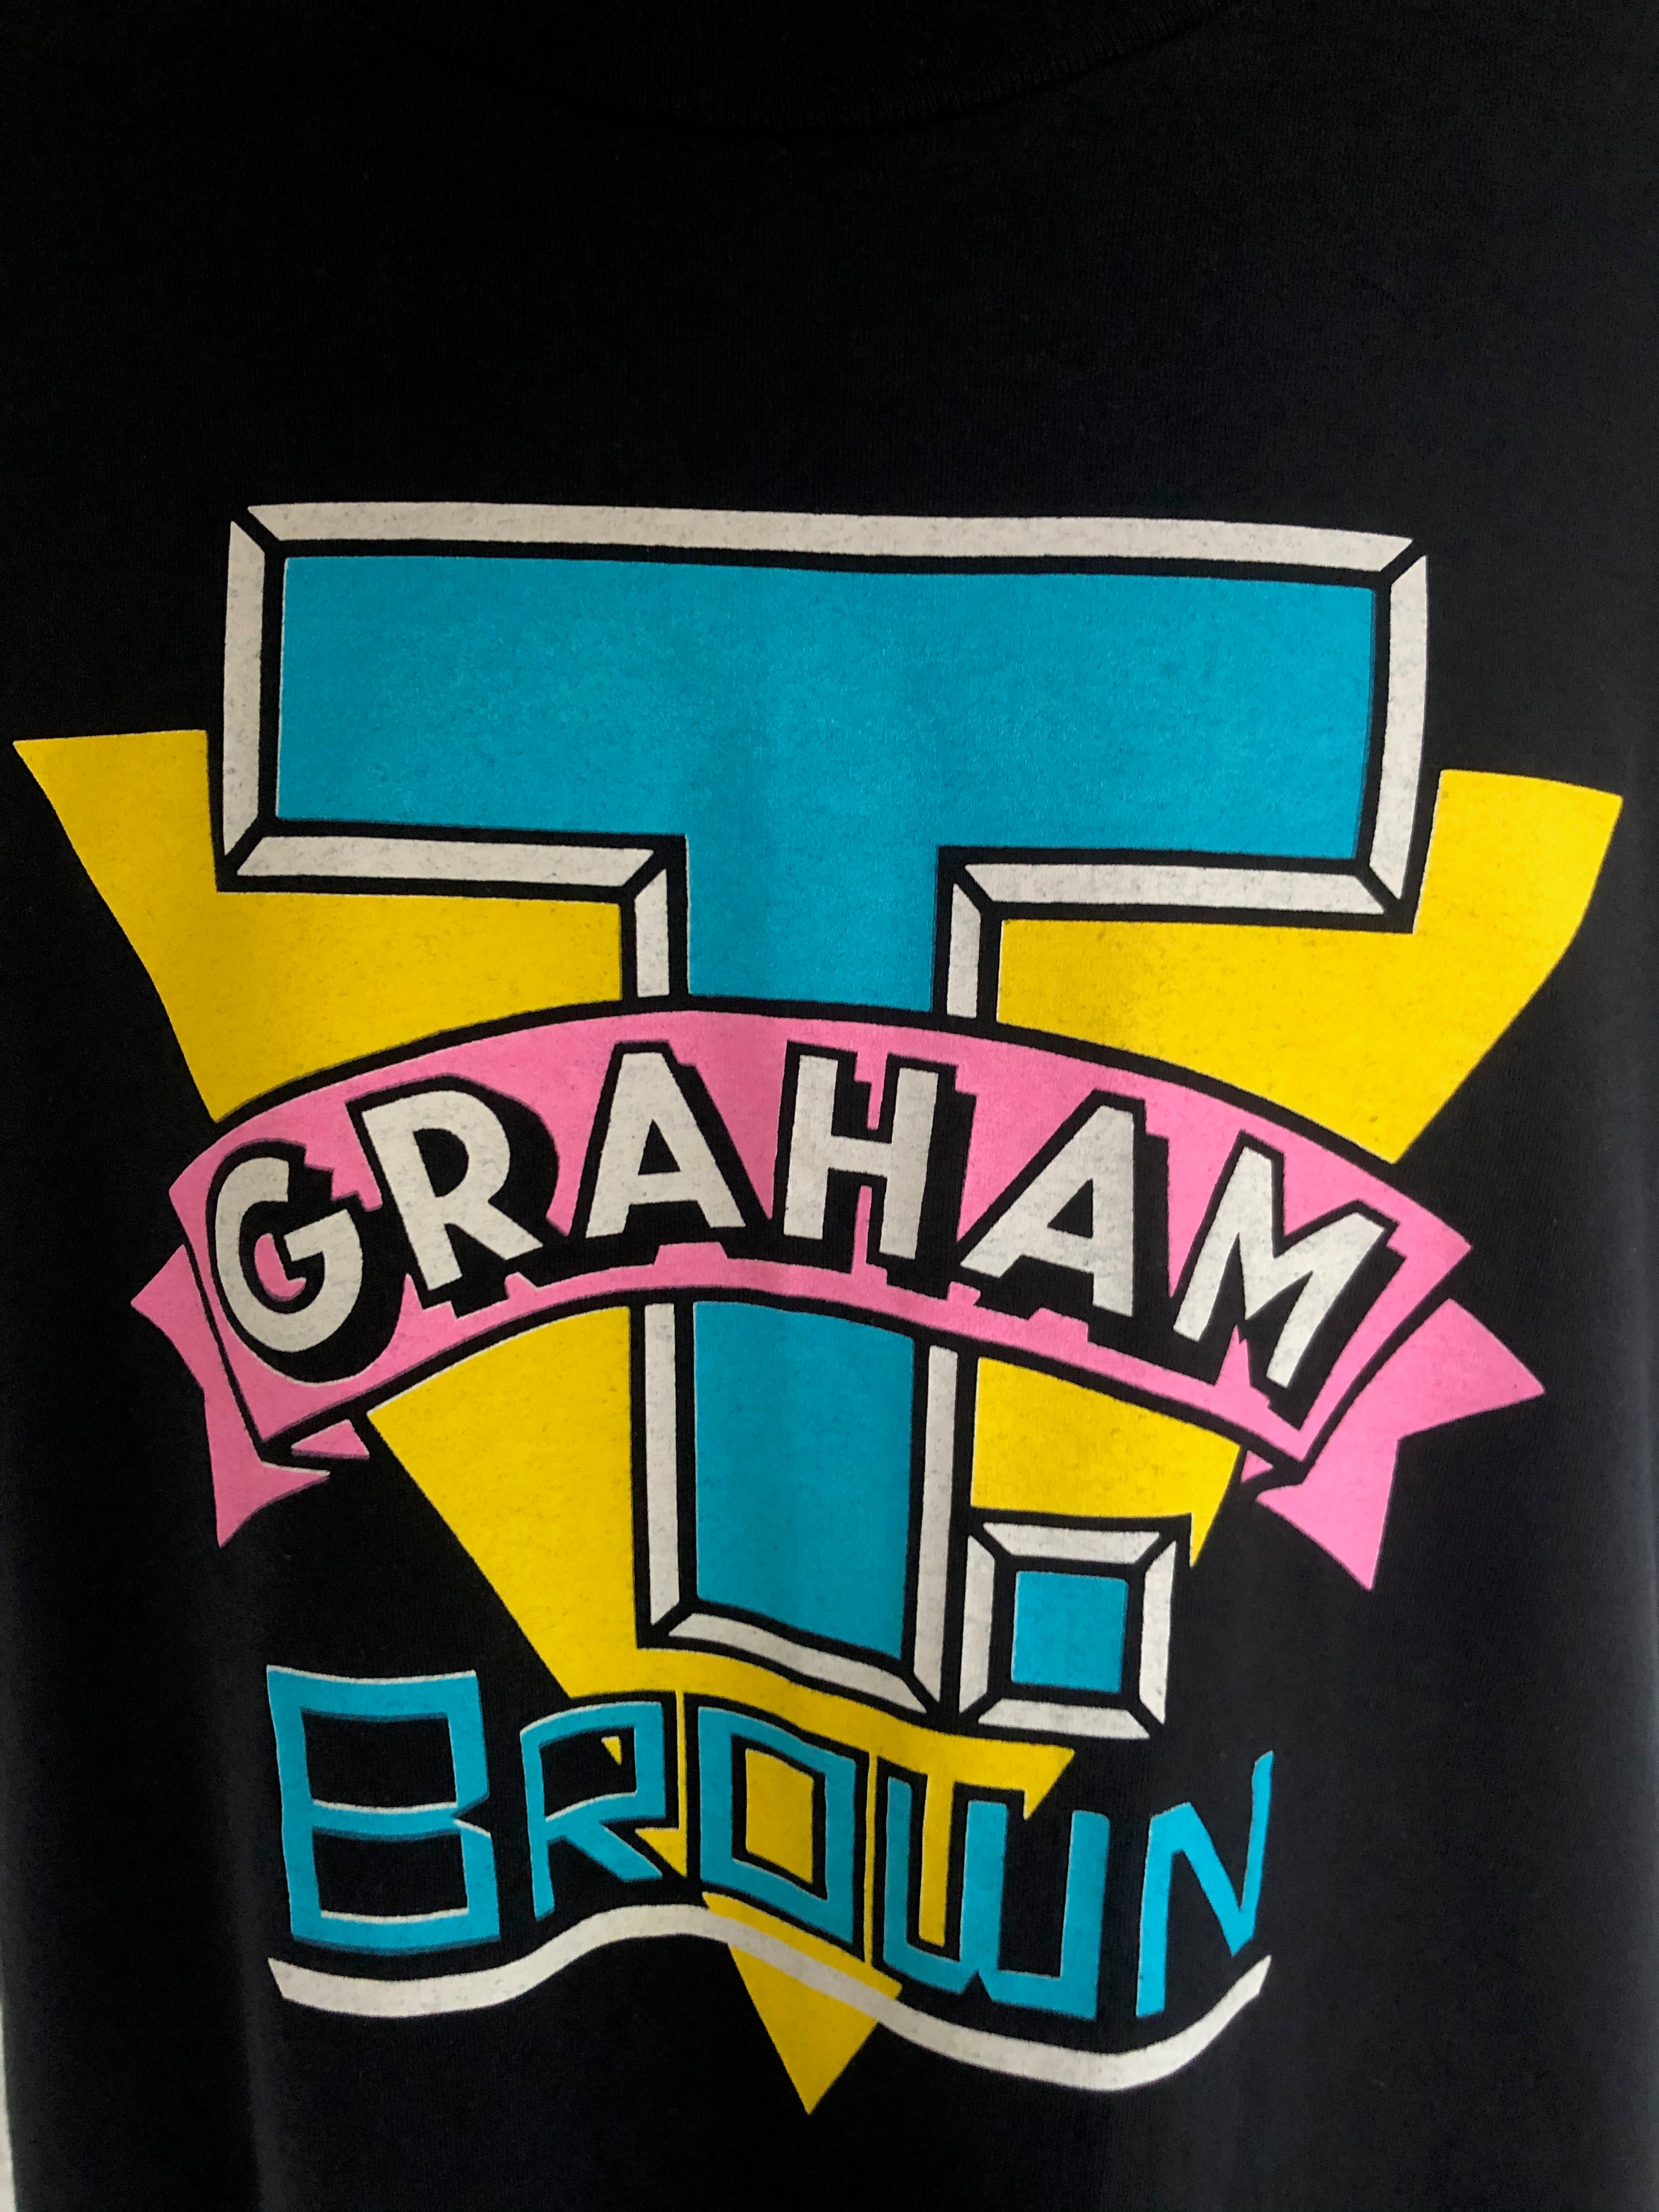 Authentic T. Graham Brown Screen Stars Tour Tee- Tote The Note Tour ‘89